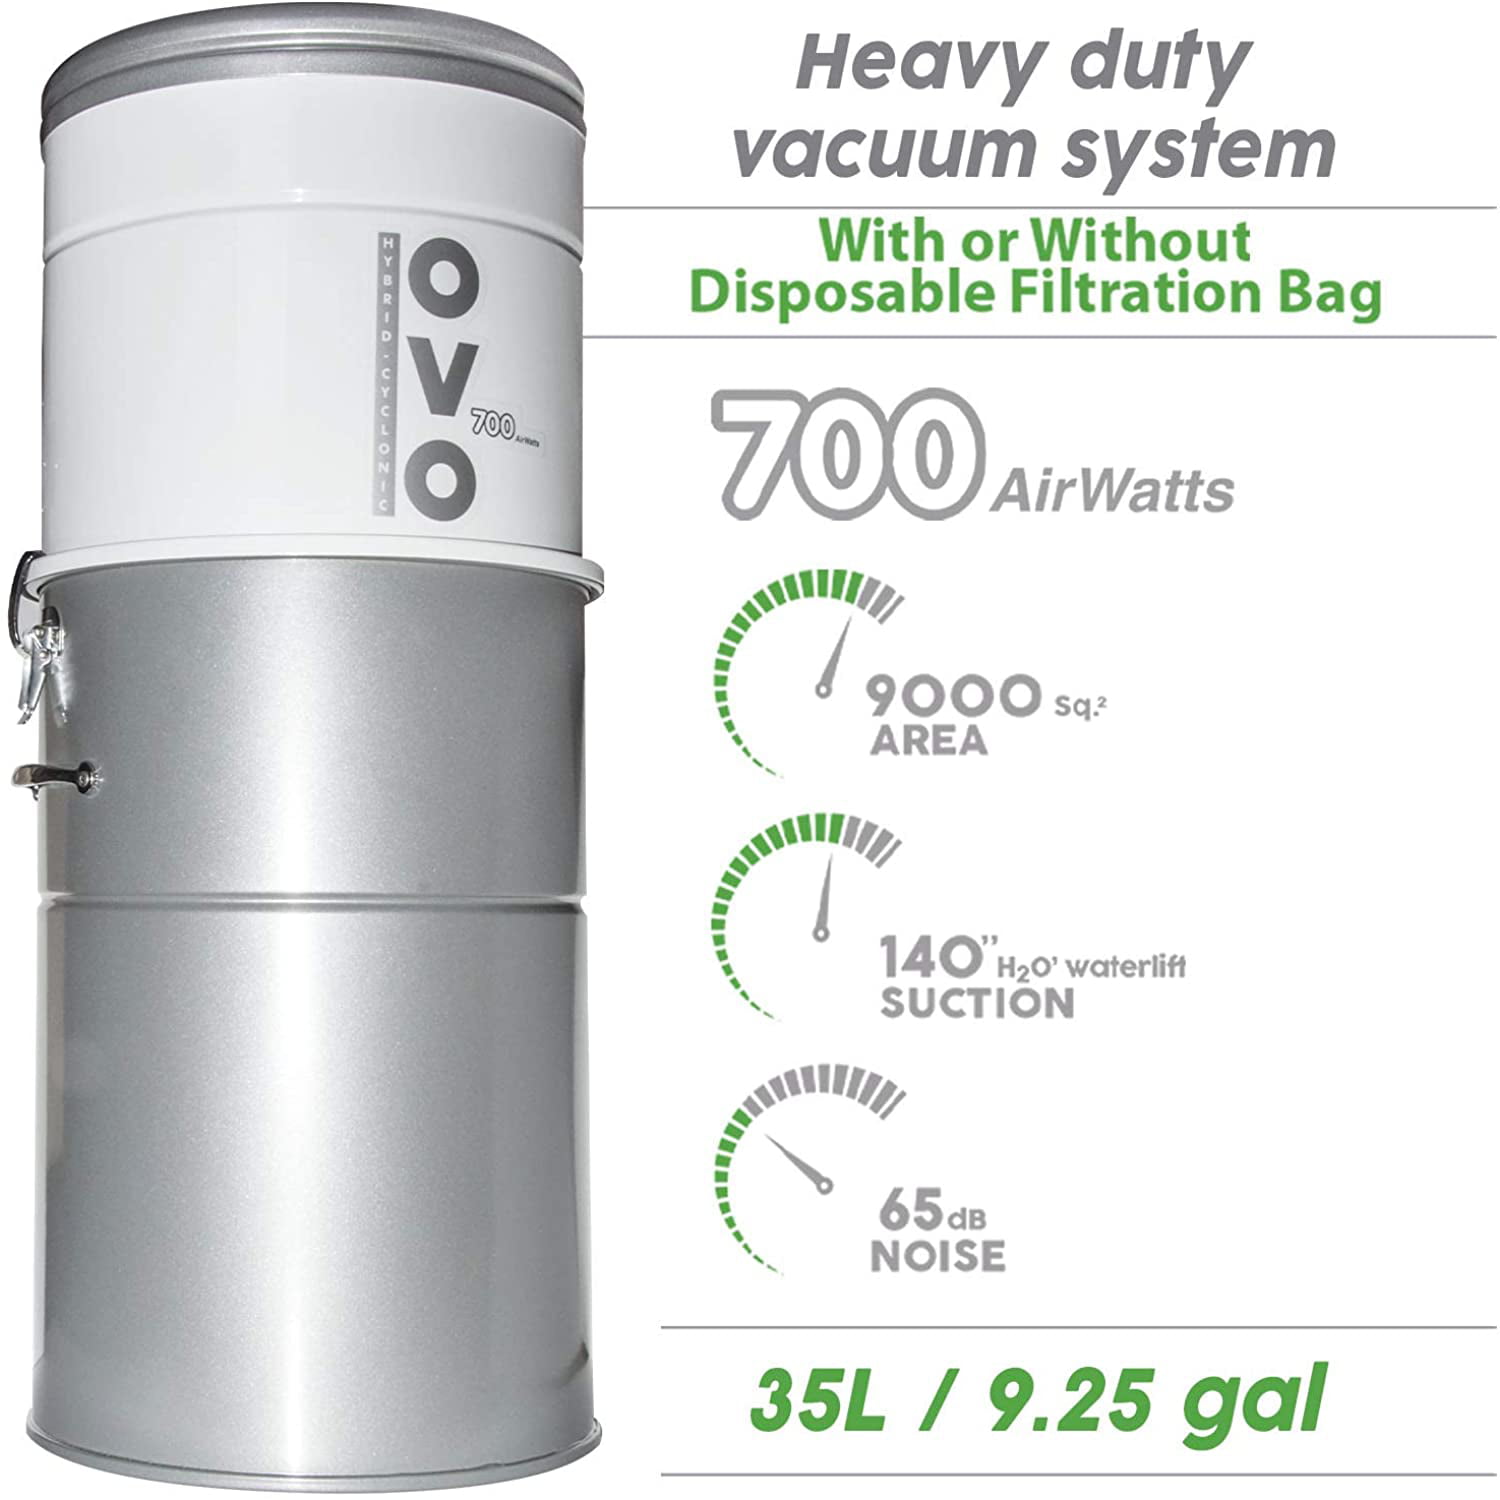 OVO AW Large and Powerful Central Vacuum System Hybrid Filtration 25L or 6.6 Gal with or Without Disposable Bags 700 Air watts and 35 ft Deluxe Accessory Kit Included White and Silver